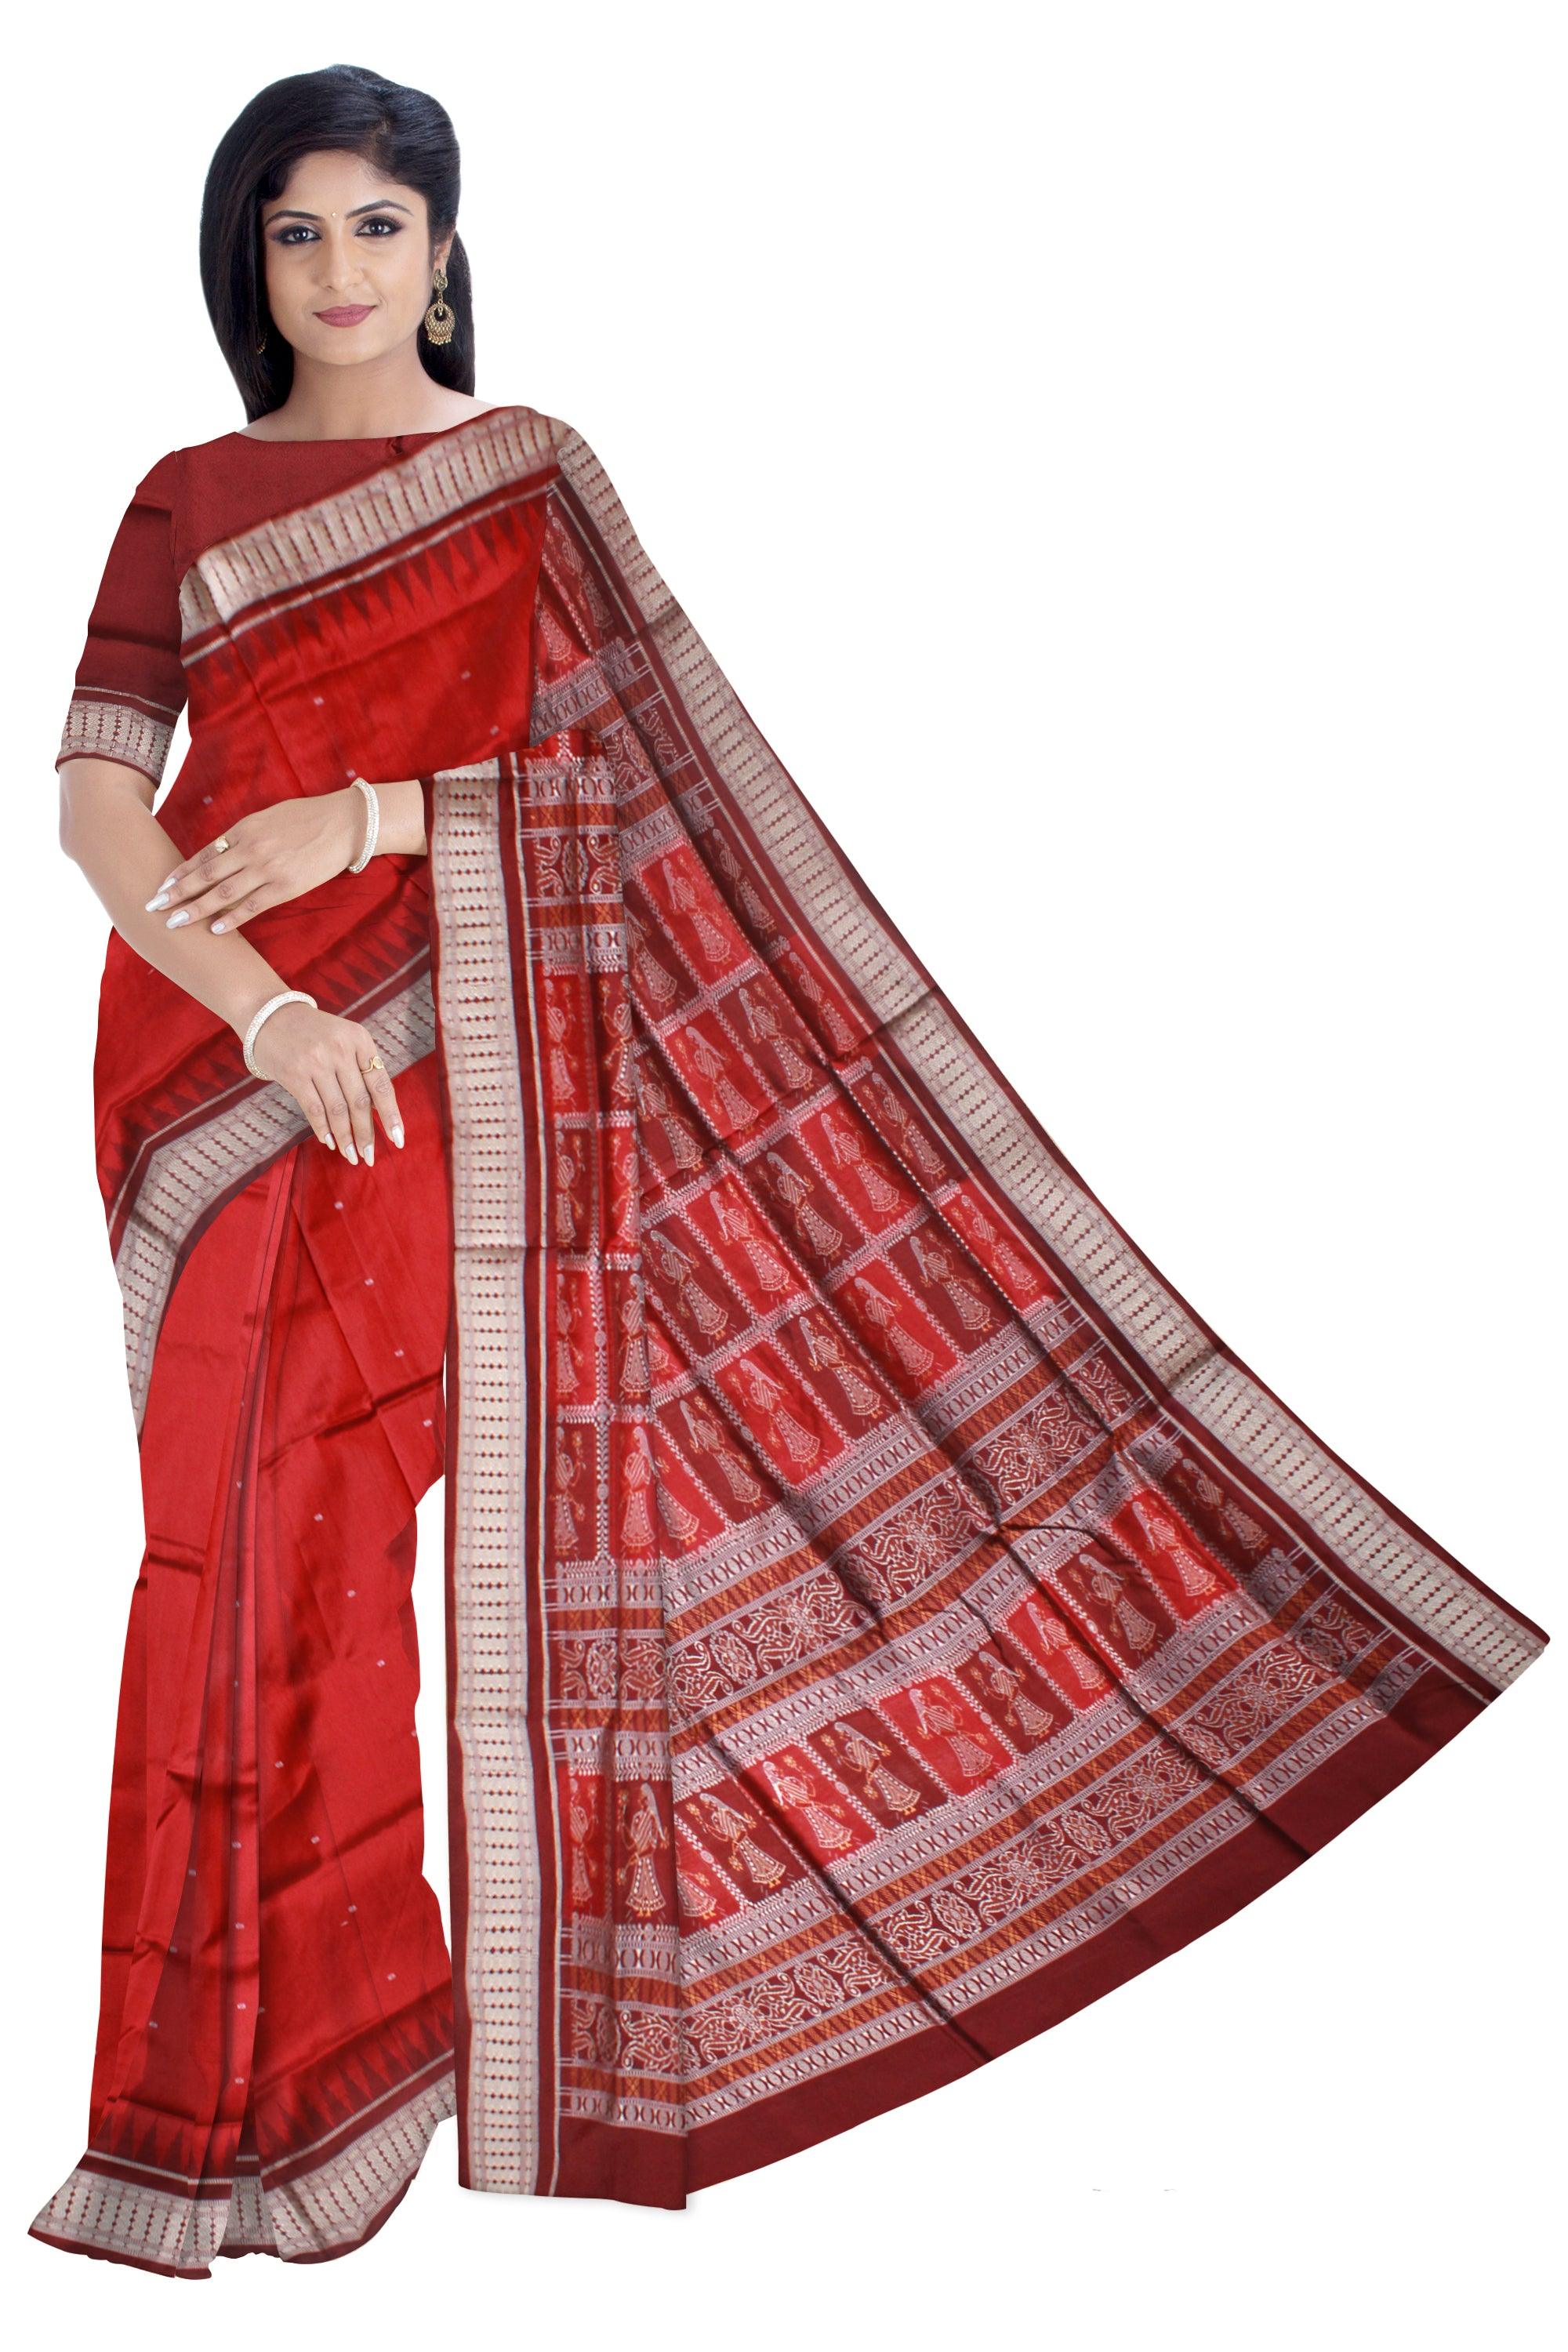 PALLU DOLL PRINT BOOTY PATTERN PATA SAREE IN RED AND MAROON COLOR BASE, WITH BLOUSE PIECE. - Koshali Arts & Crafts Enterprise